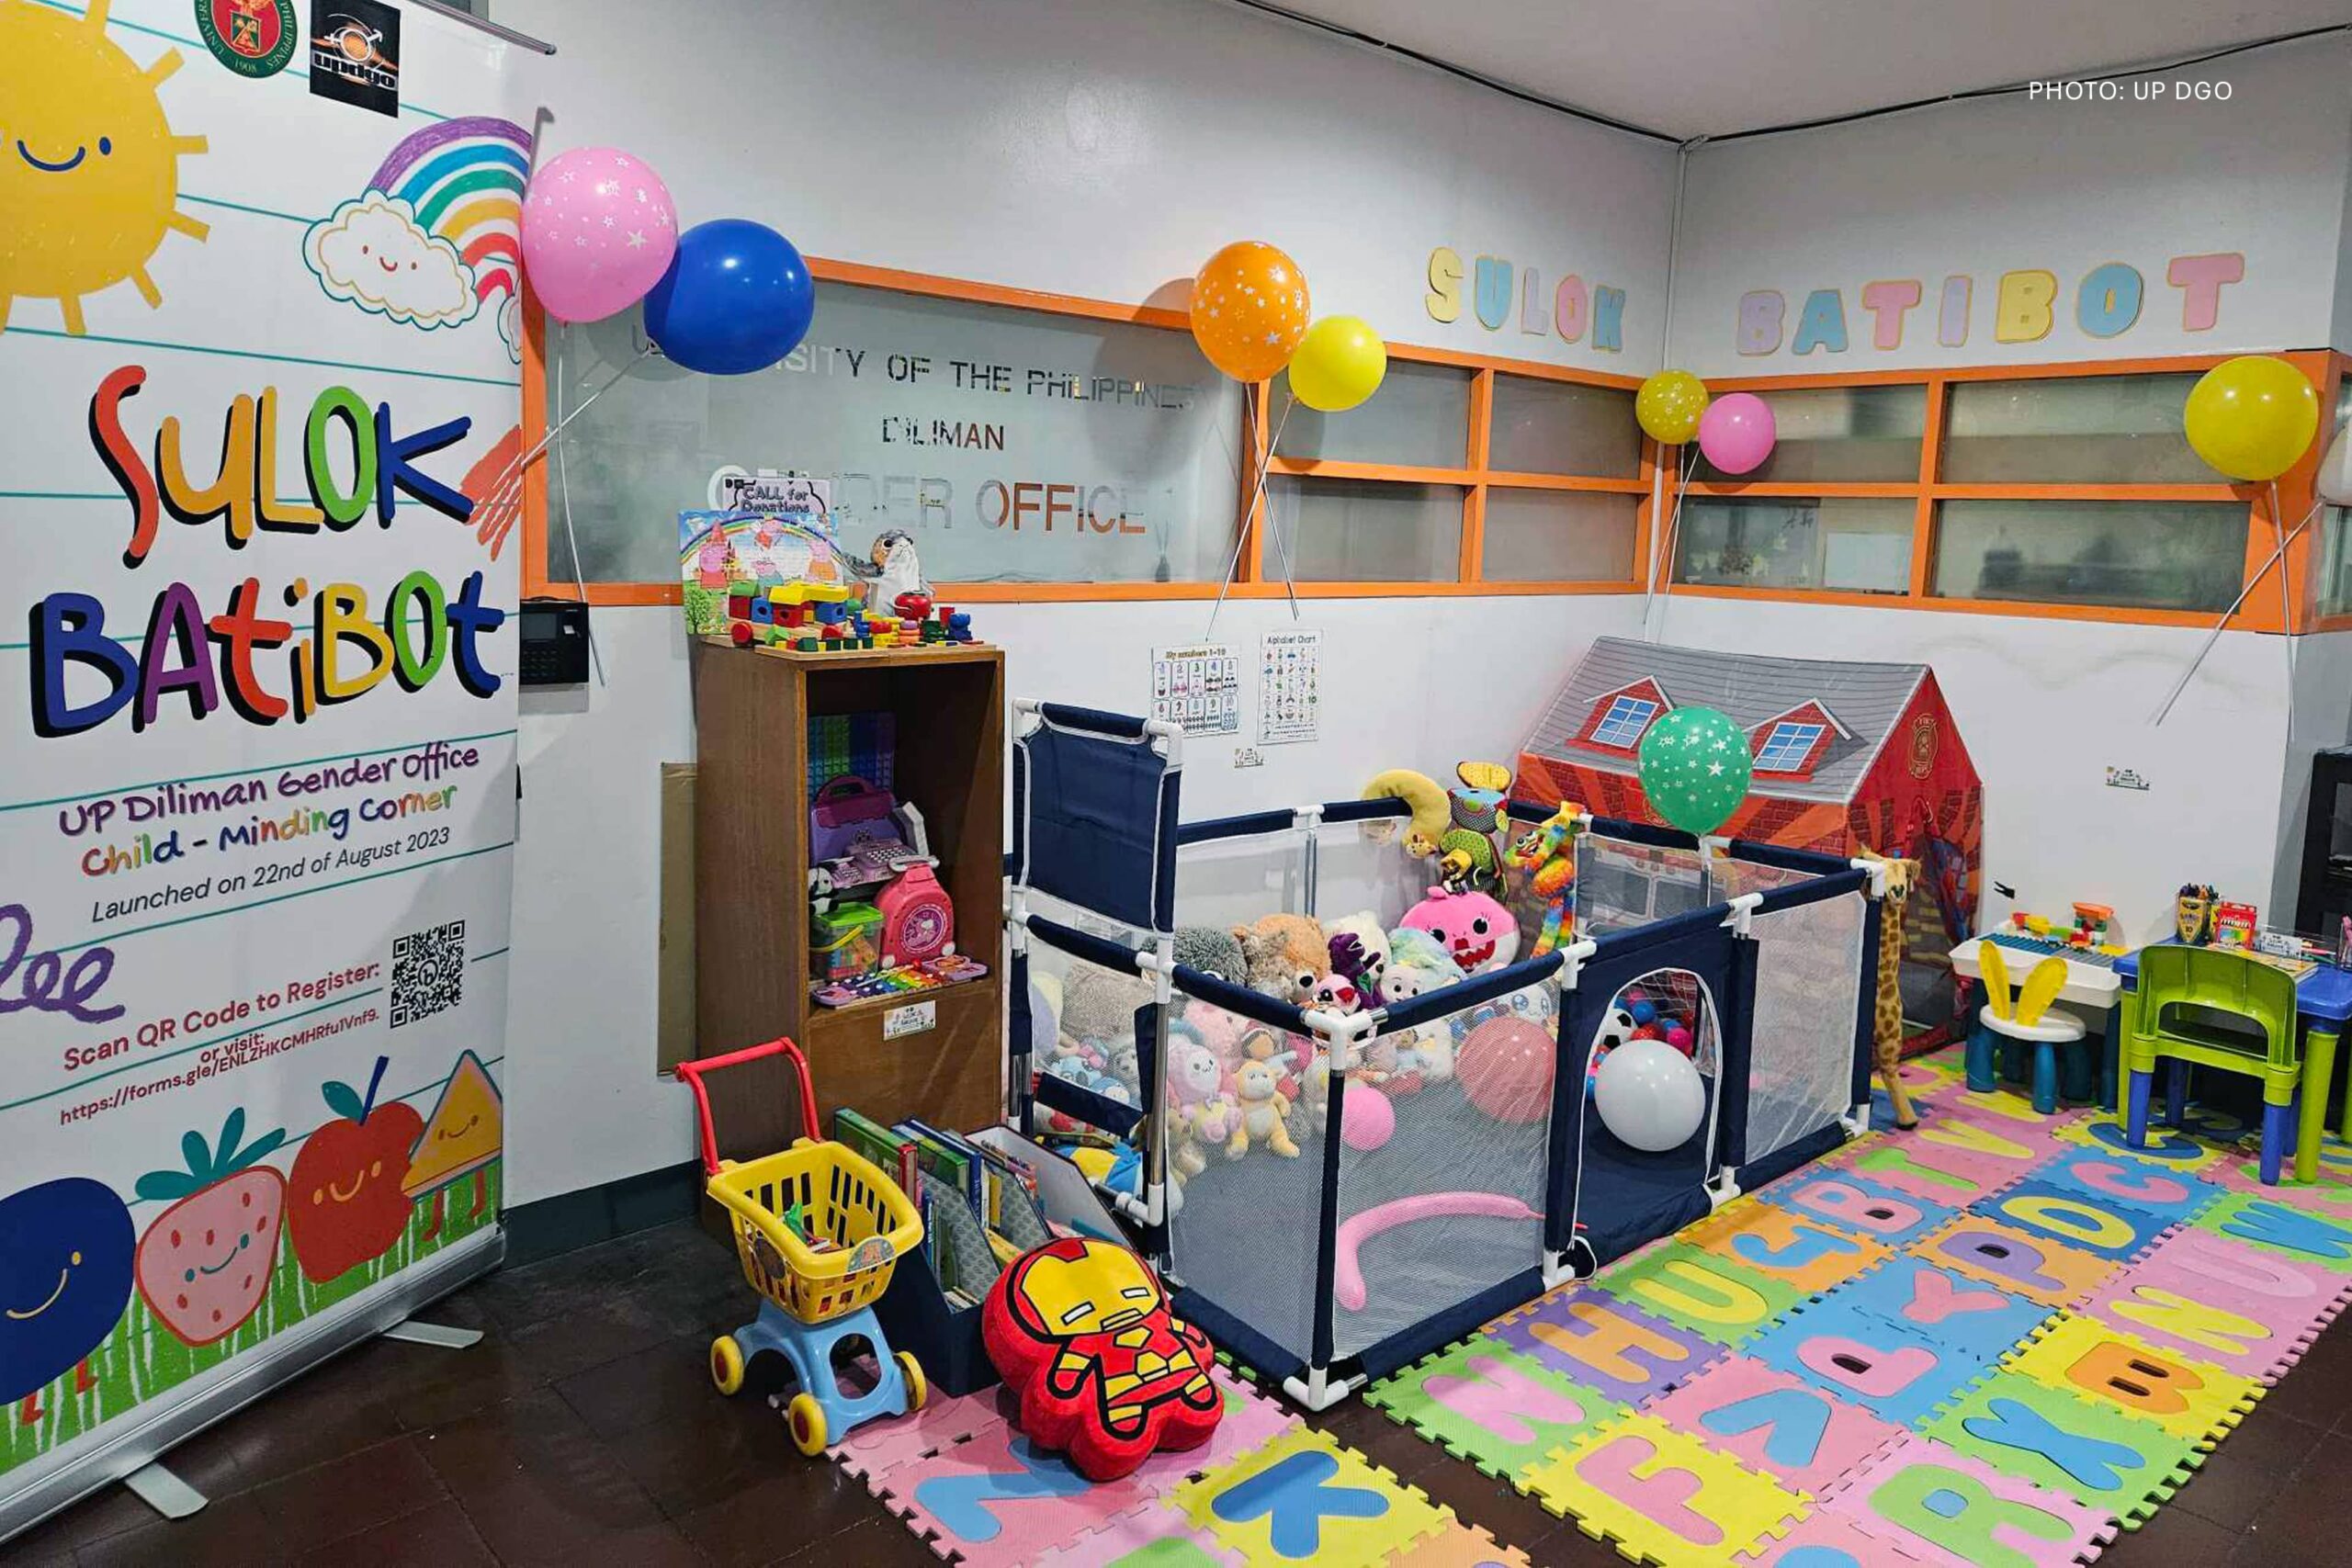 The UP Diliman Gender Office launched the "Sulok Batibot" project on August 22, introducing a childminding corner at Benton Hall on campus. Photo: UP DGO